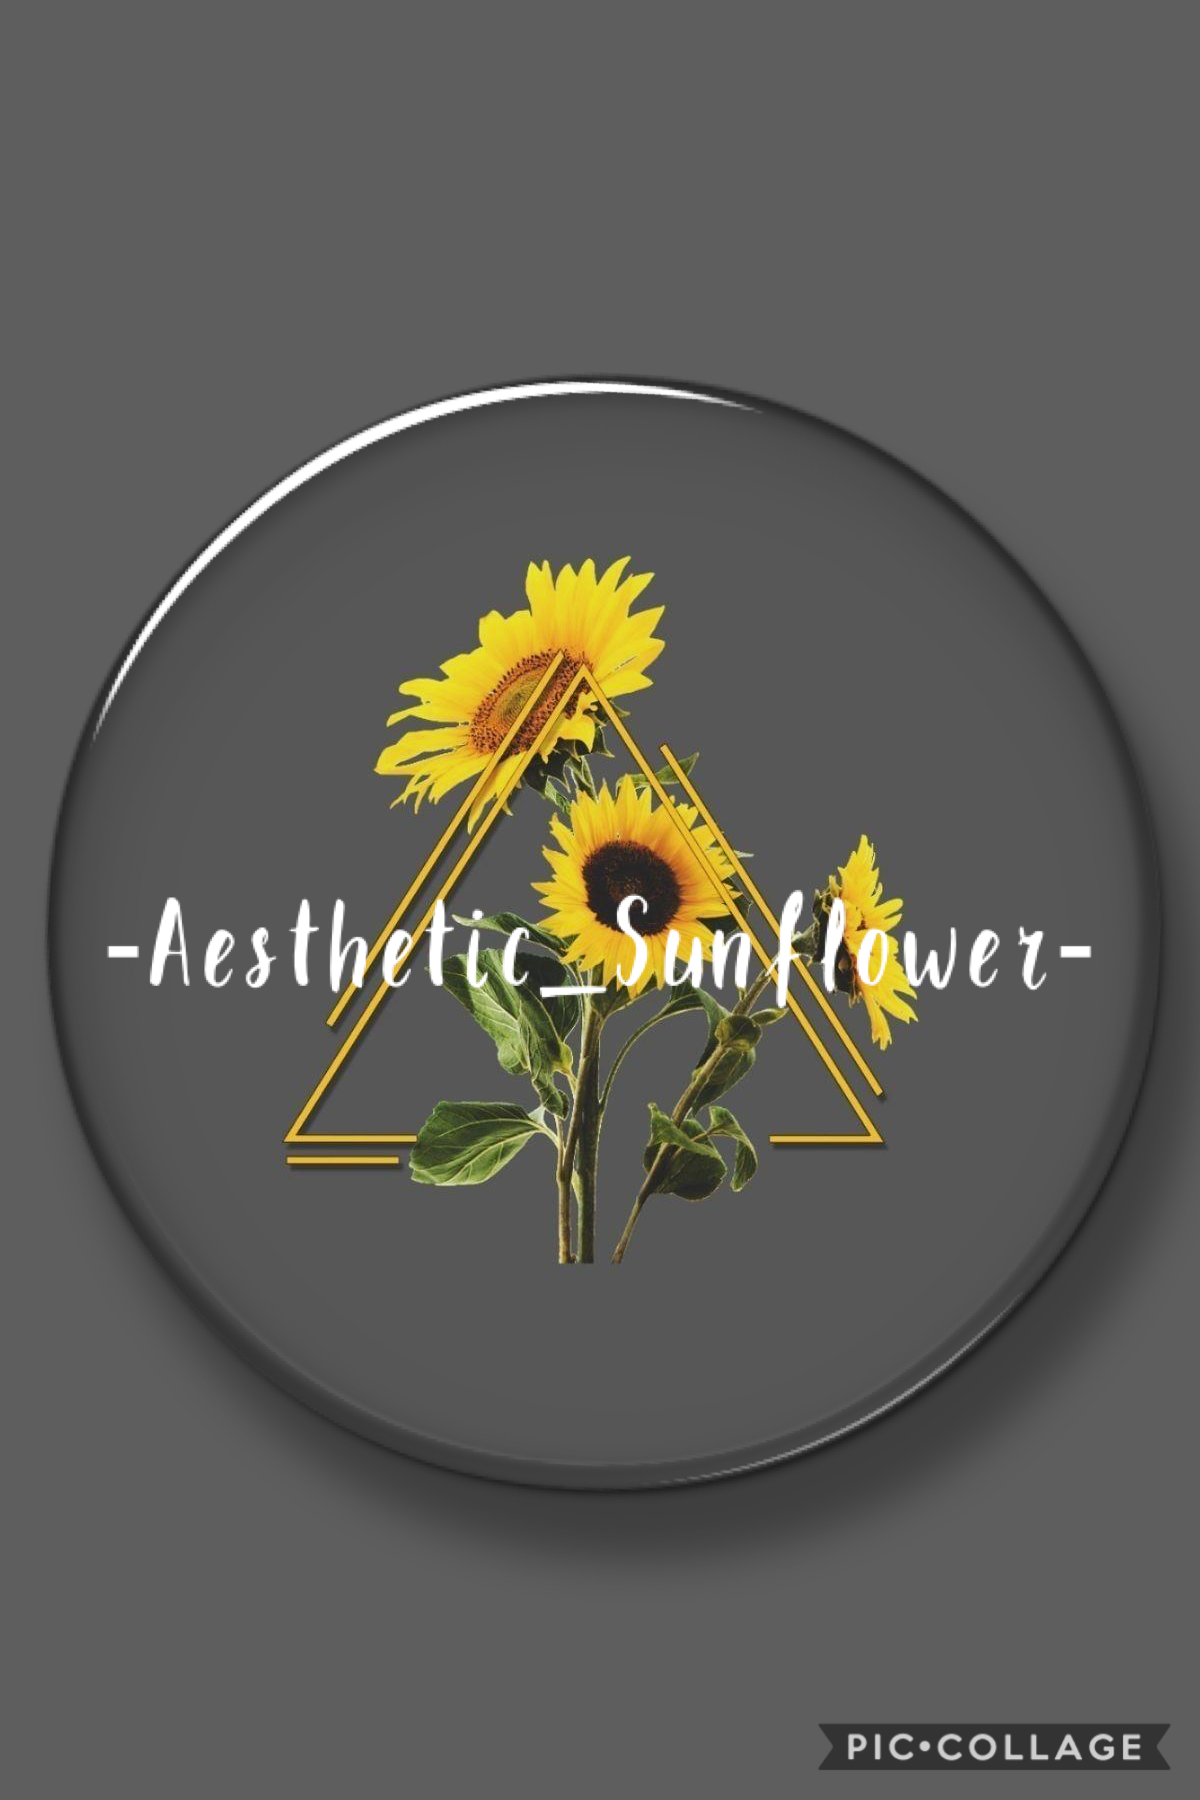 My new iconnnn check out all my accounts they've changed!! Btw I will now be calling my followers "Sunflowers" 🌻🌻🌻